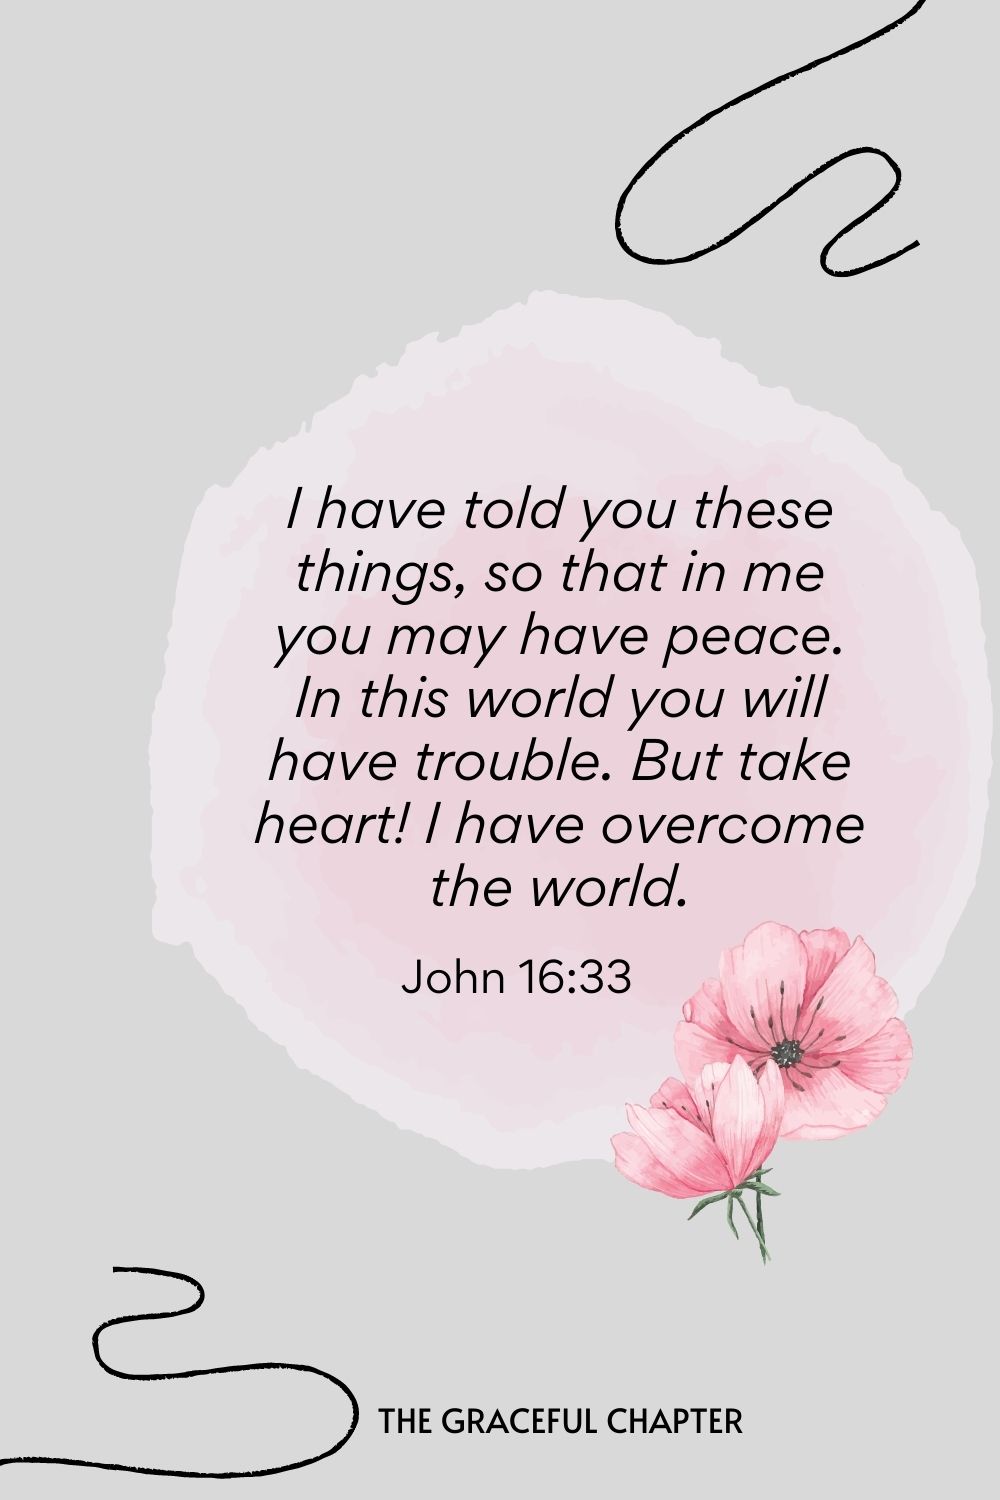 I have told you these things, so that in me you may have peace. In this world you will have trouble. But take heart! I have overcome the world.  John 16:33